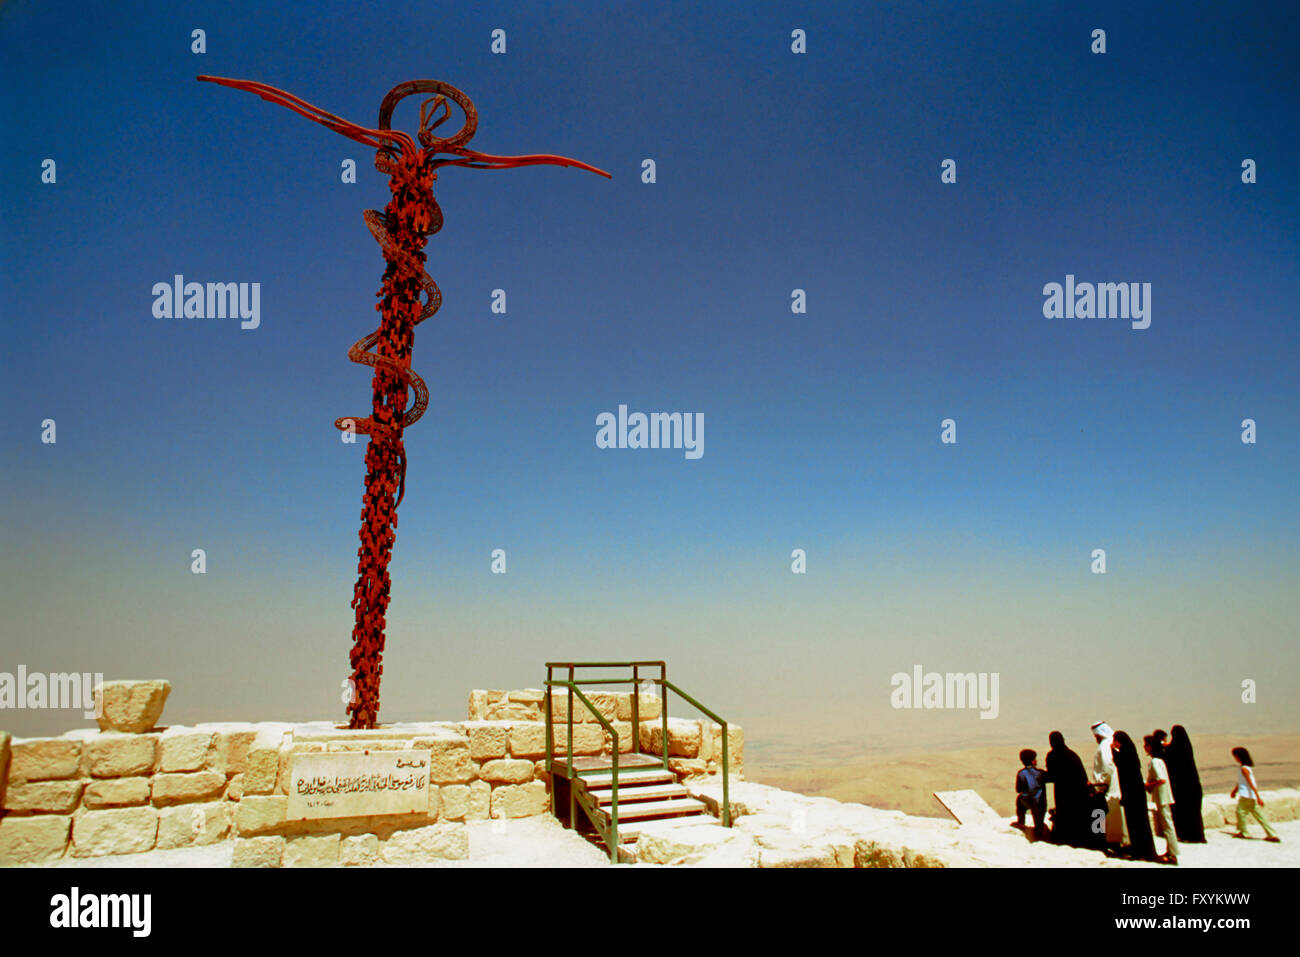 Serpentine Cross or Brazen Serpent Monument at the Moses Memorial Church, Mt Nebo, overlooking Jordan valley and Jericho oasis, Stock Photo